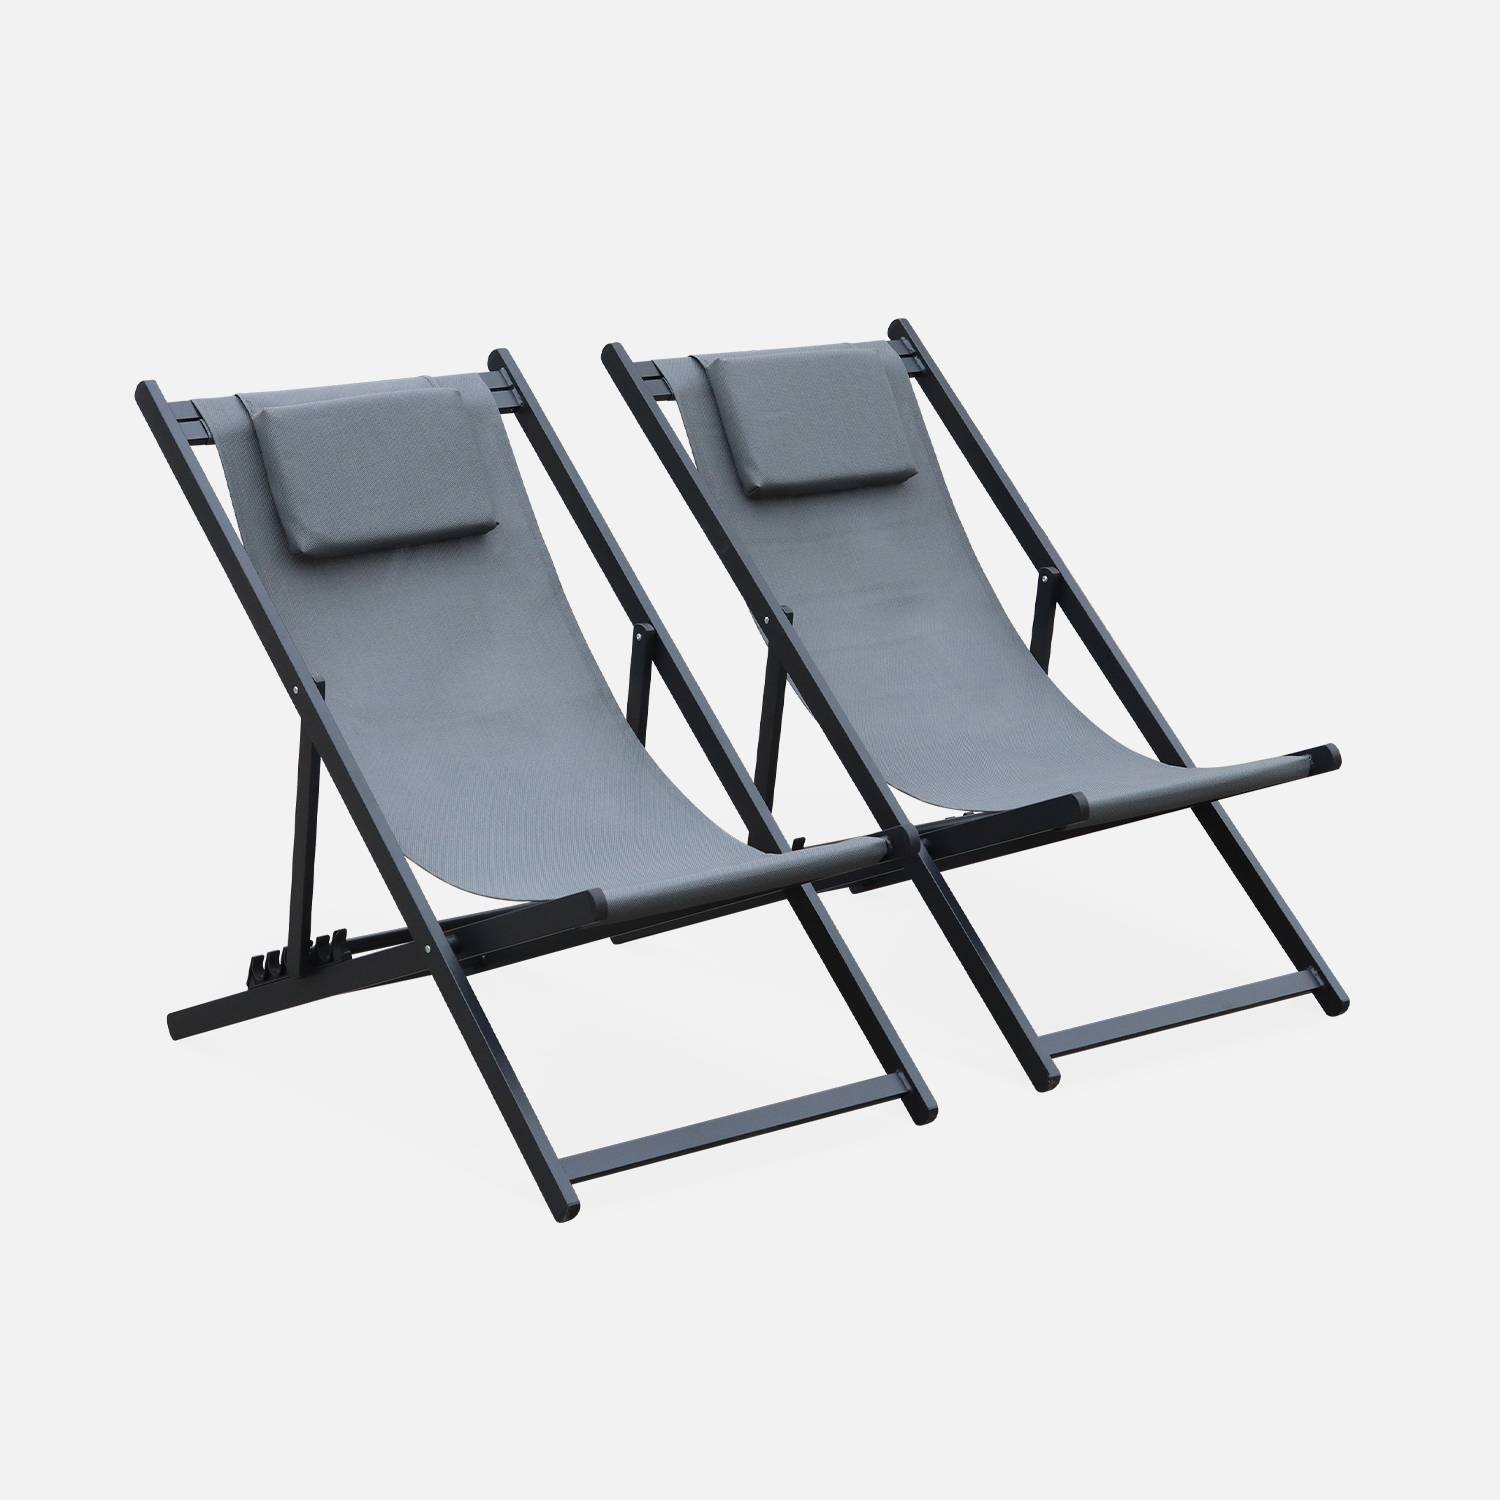 Set of 2 sun loungers - adjustable deck chairs with headrests made from aluminium frame - Gaia - Anthracite frame, Grey textilene Photo2